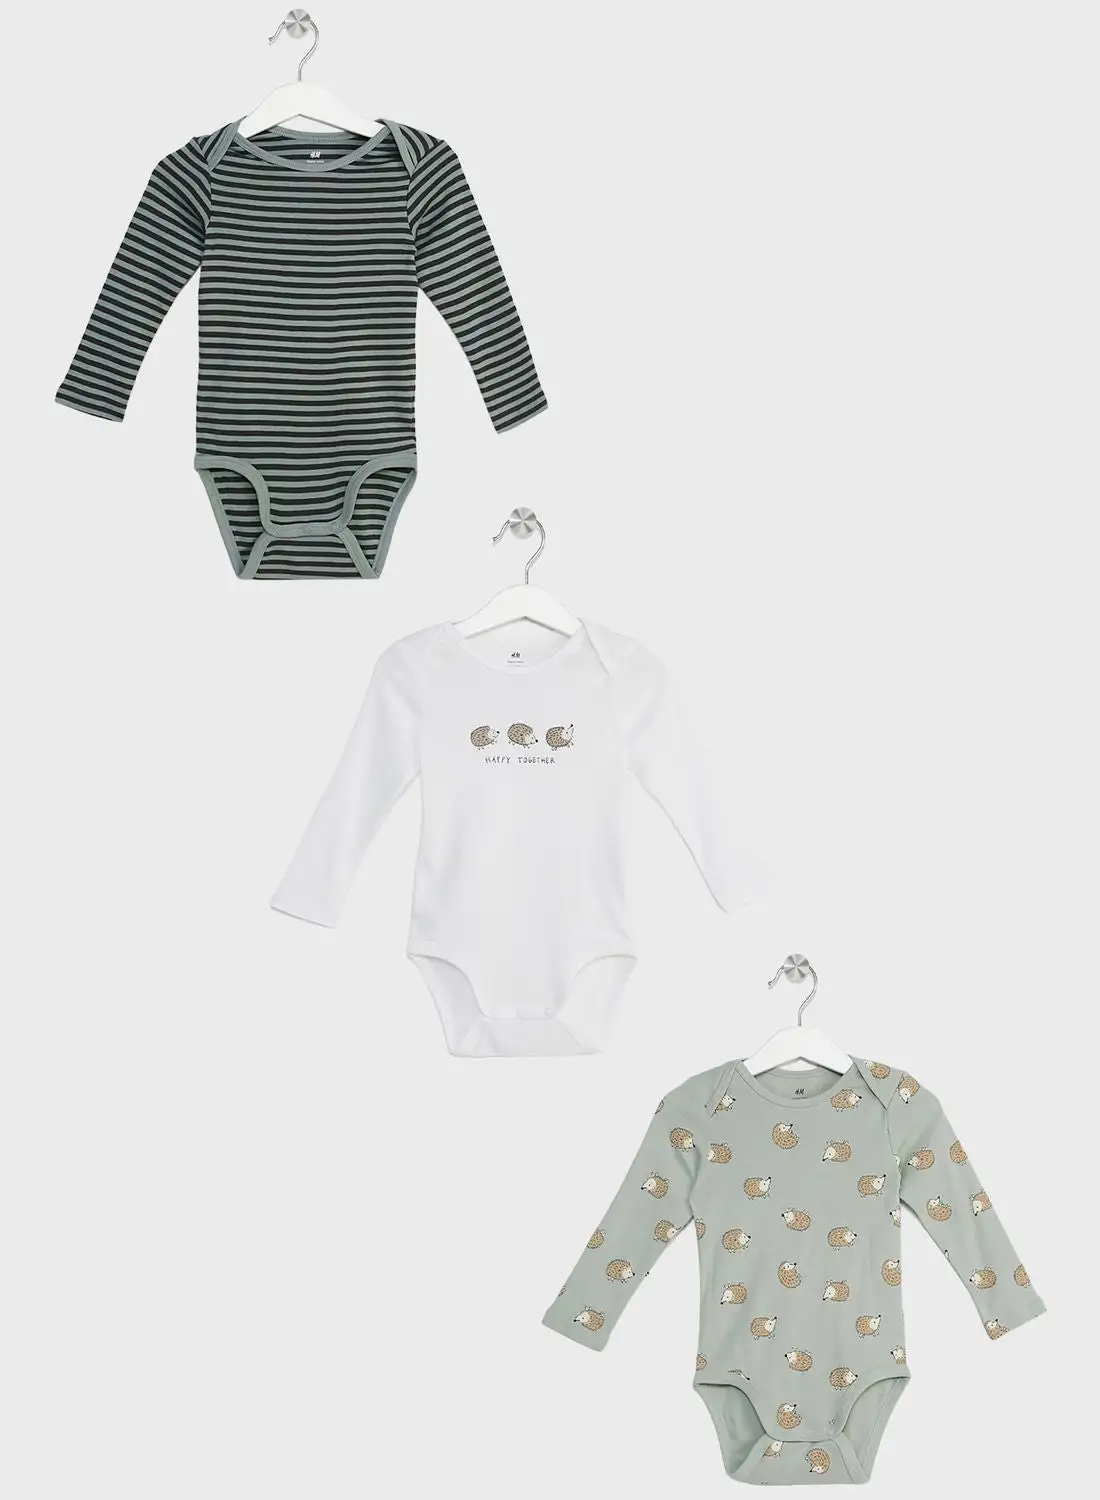 H&M Infant 3 Pack Assorted Bodysuits